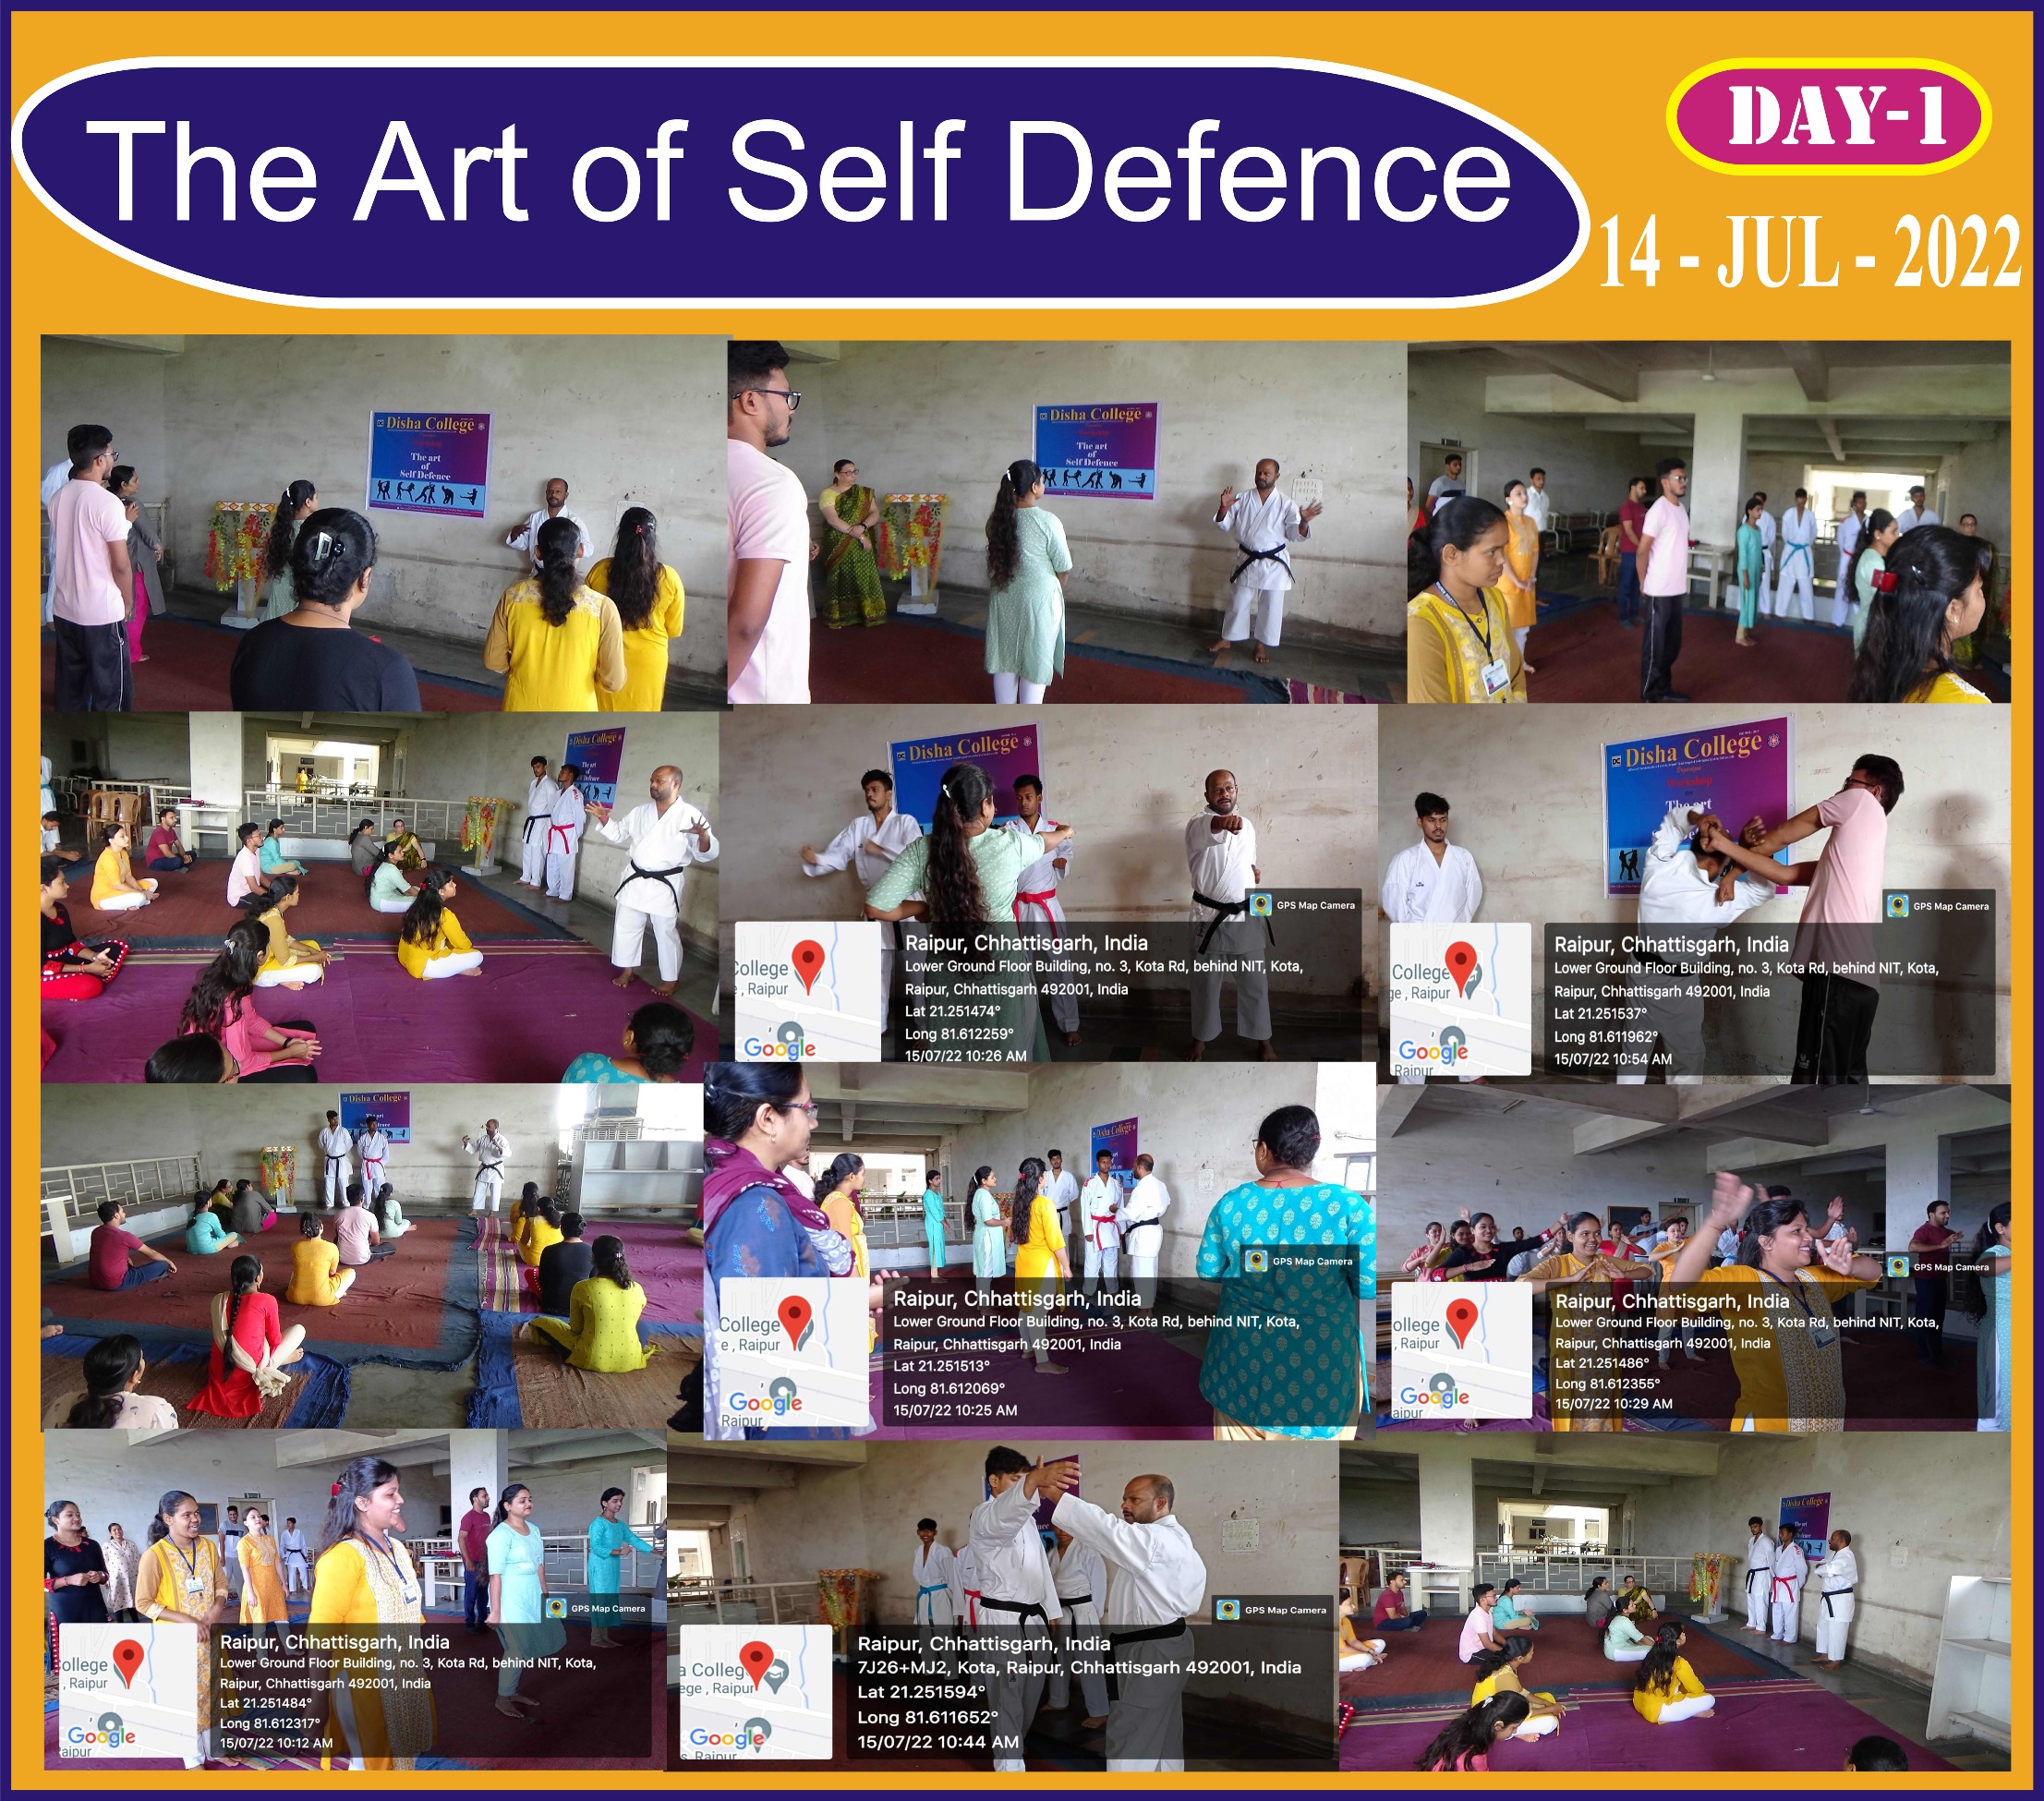 The Art of Self Defense - Day-1